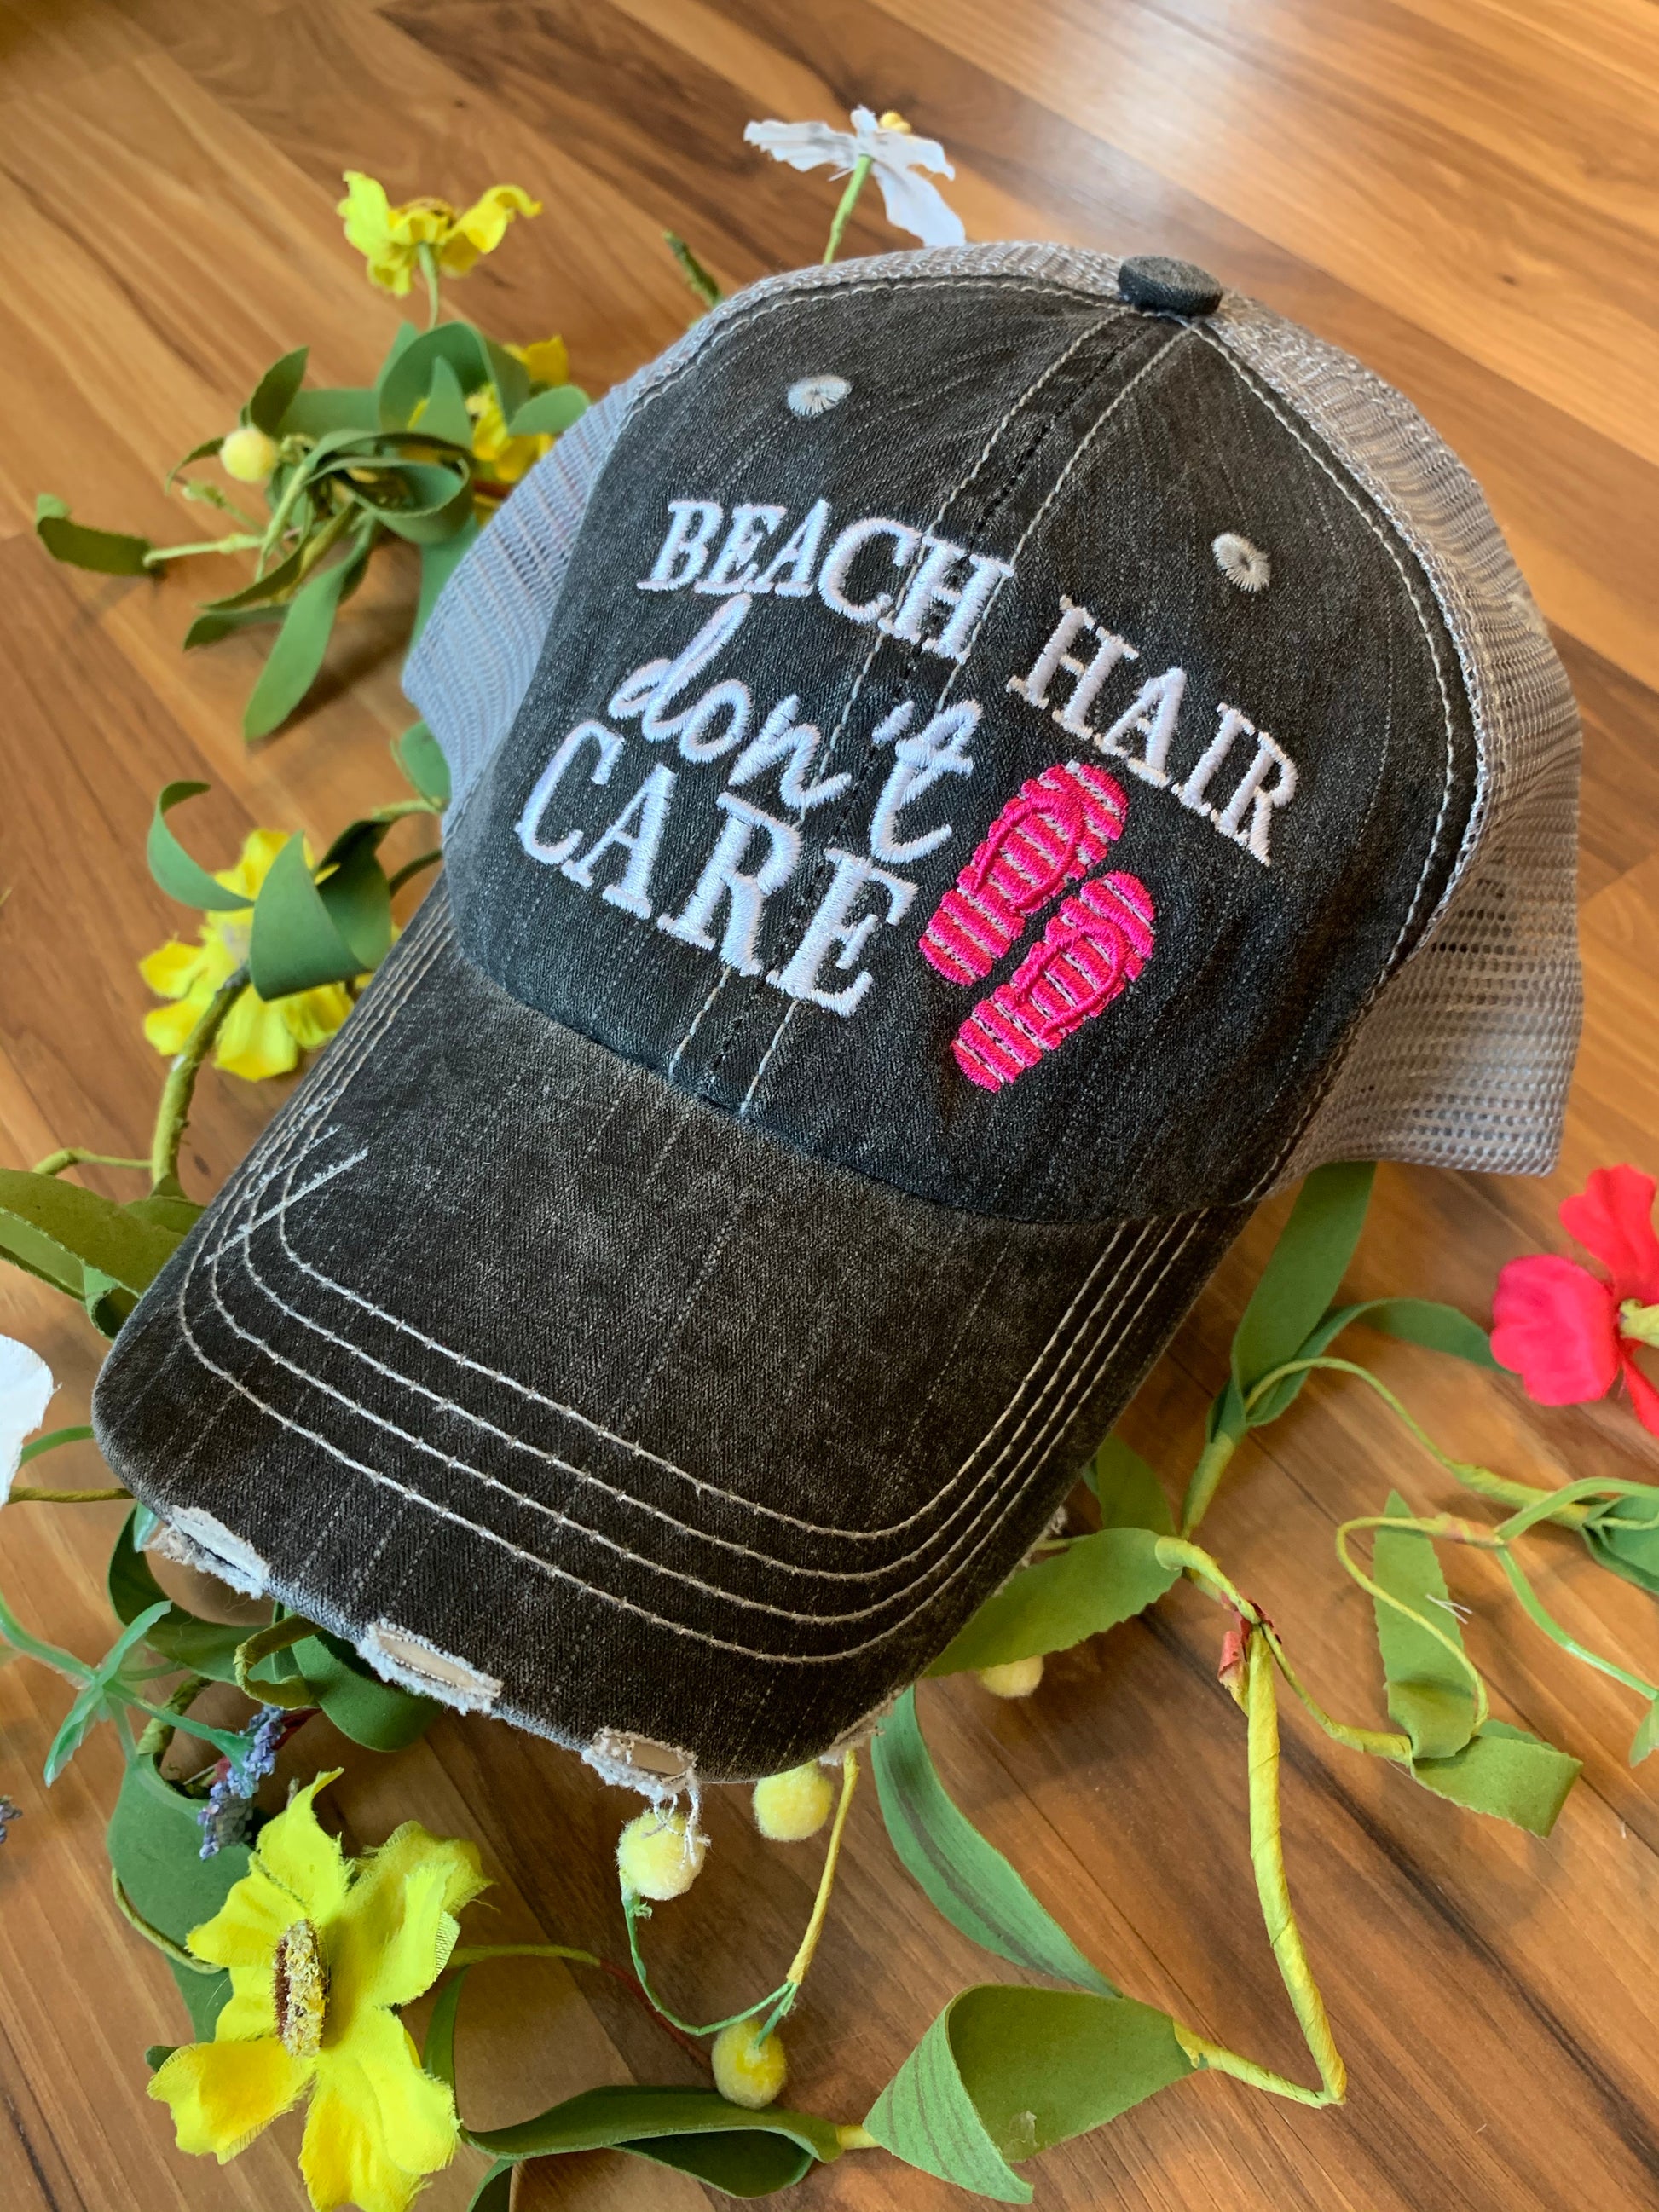 Pool hats Embroidered gray distressed unisex trucker caps Pool hair dont care Pool please Flamingos Flip flops - Stacy's Pink Martini Boutique